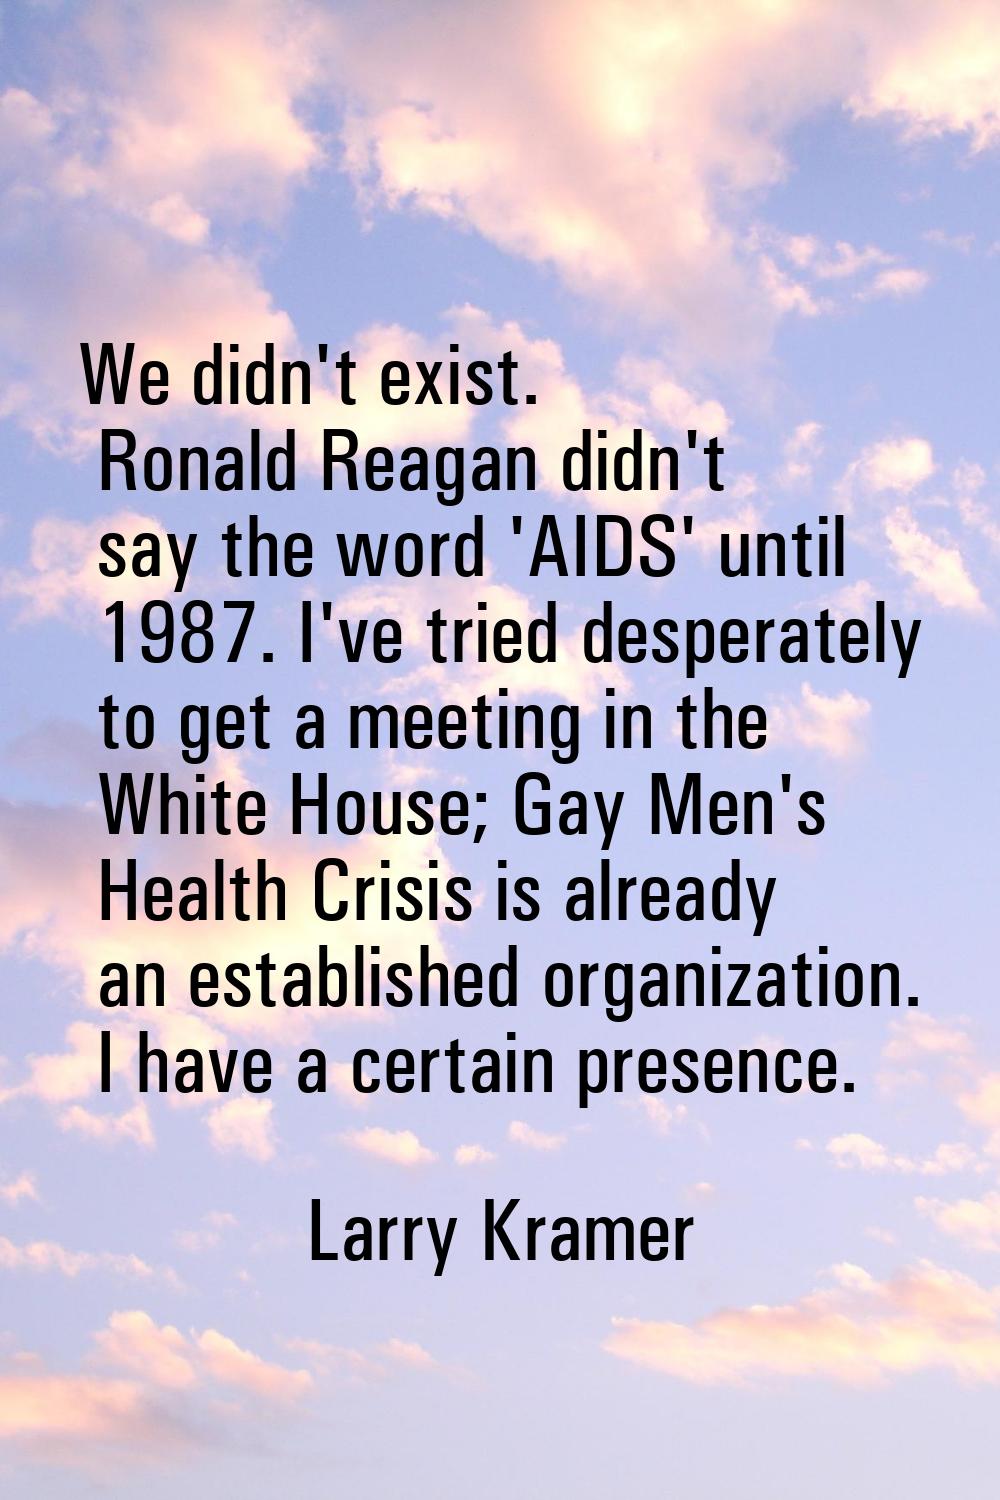 We didn't exist. Ronald Reagan didn't say the word 'AIDS' until 1987. I've tried desperately to get